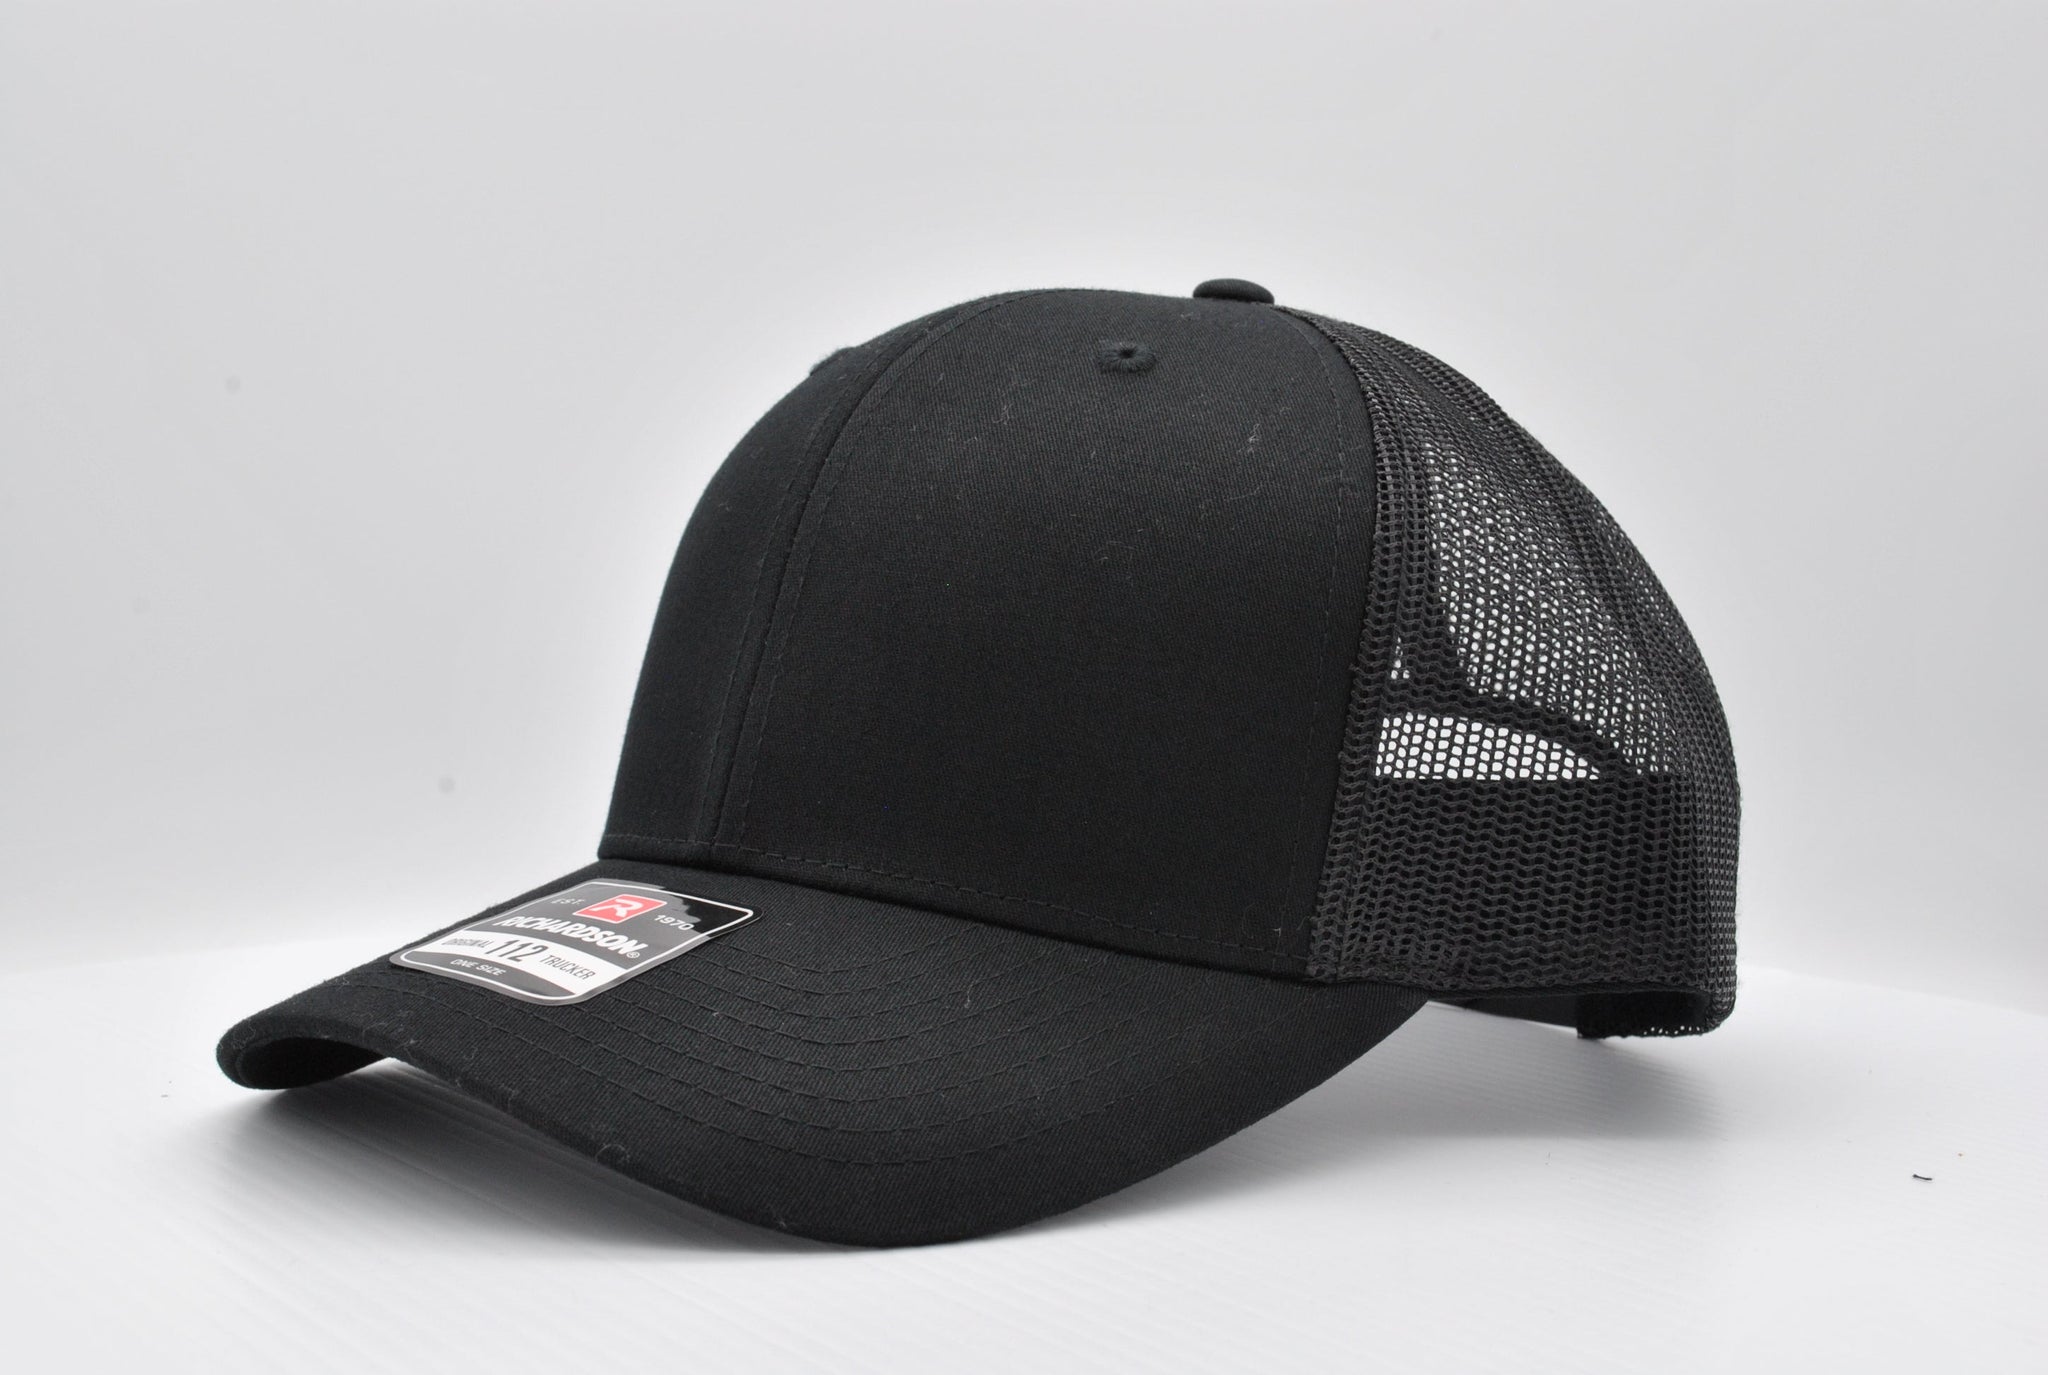 Peoria Fire Department Local 50 - Style 4 (Snapback Mesh Back)